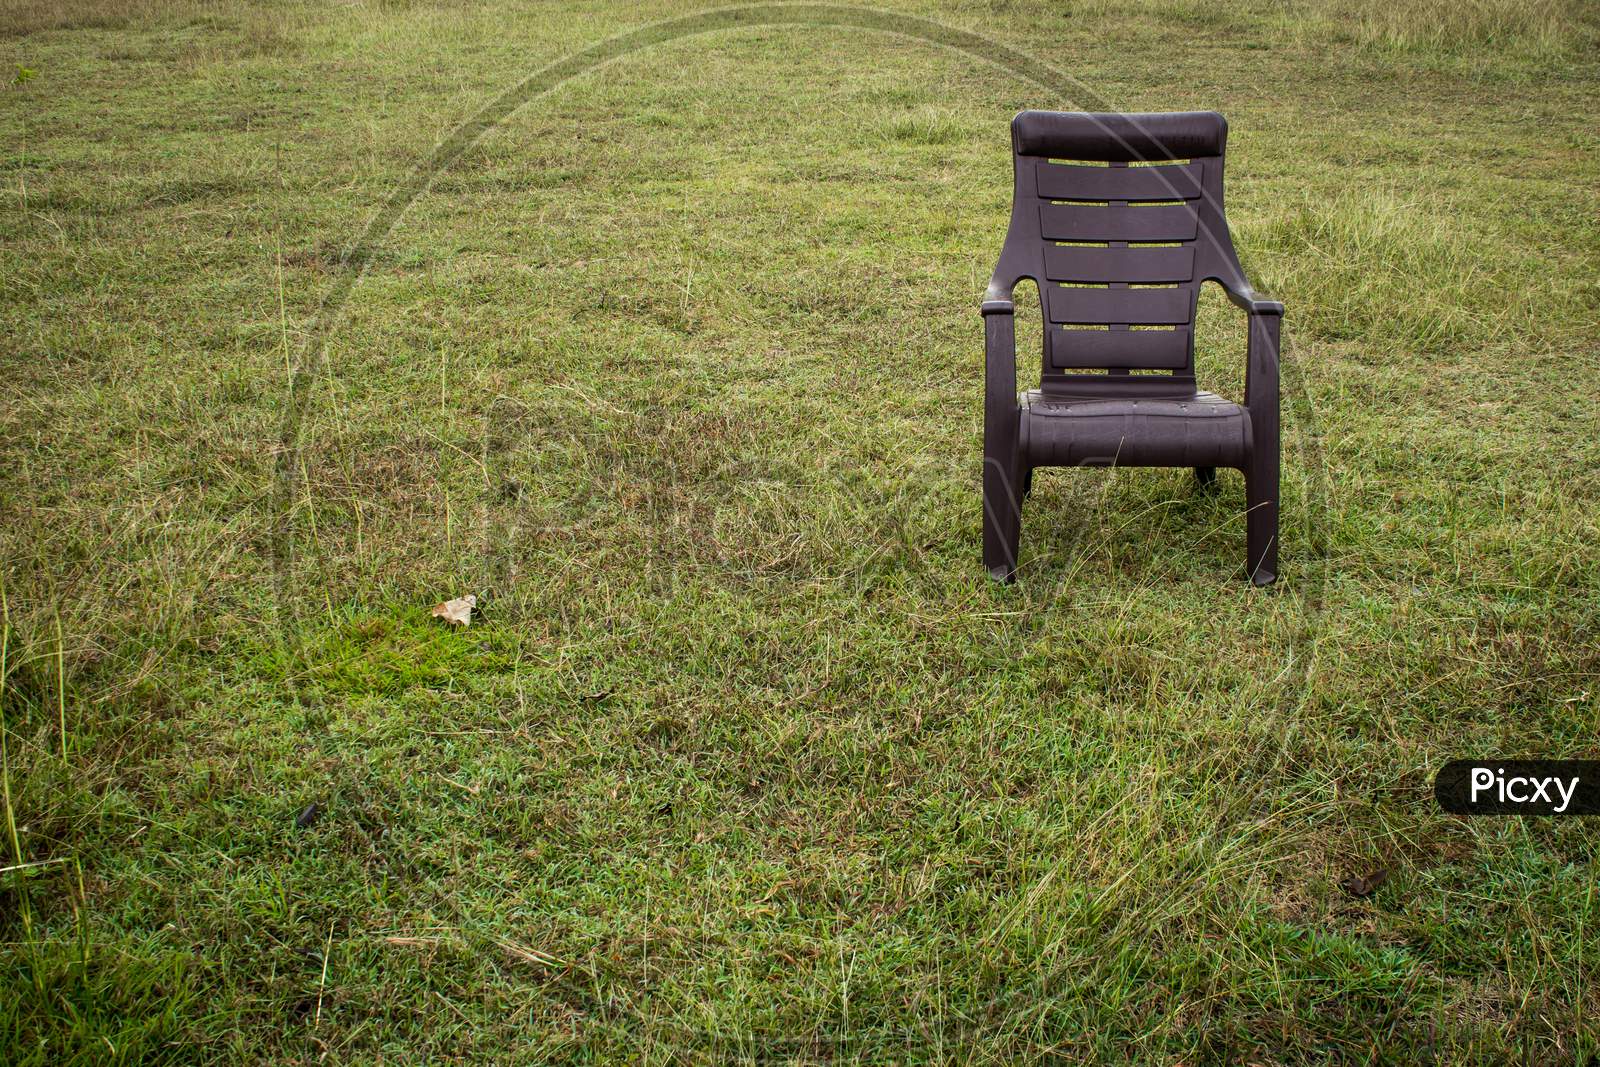 A Plastic Chair In A Green Grass Field. Empty Chair In A Park.